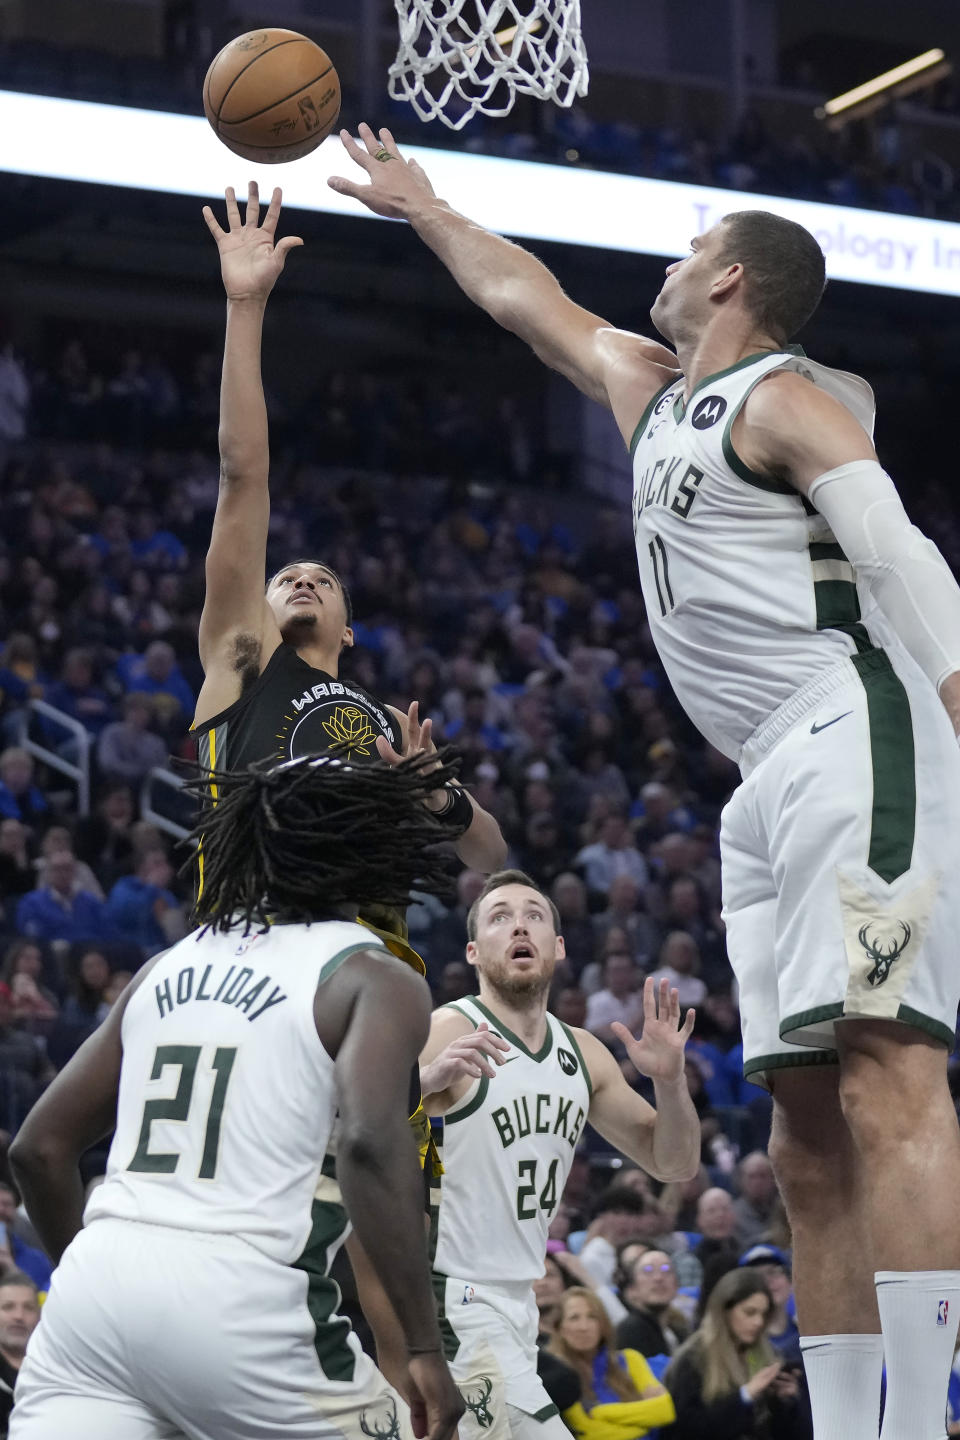 Golden State Warriors guard Jordan Poole, top left, shoots against Milwaukee Bucks guard Jrue Holiday (21), guard Pat Connaughton (24) and center Brook Lopez (11) during the first half of an NBA basketball game in San Francisco, Saturday, March 11, 2023. (AP Photo/Jeff Chiu)